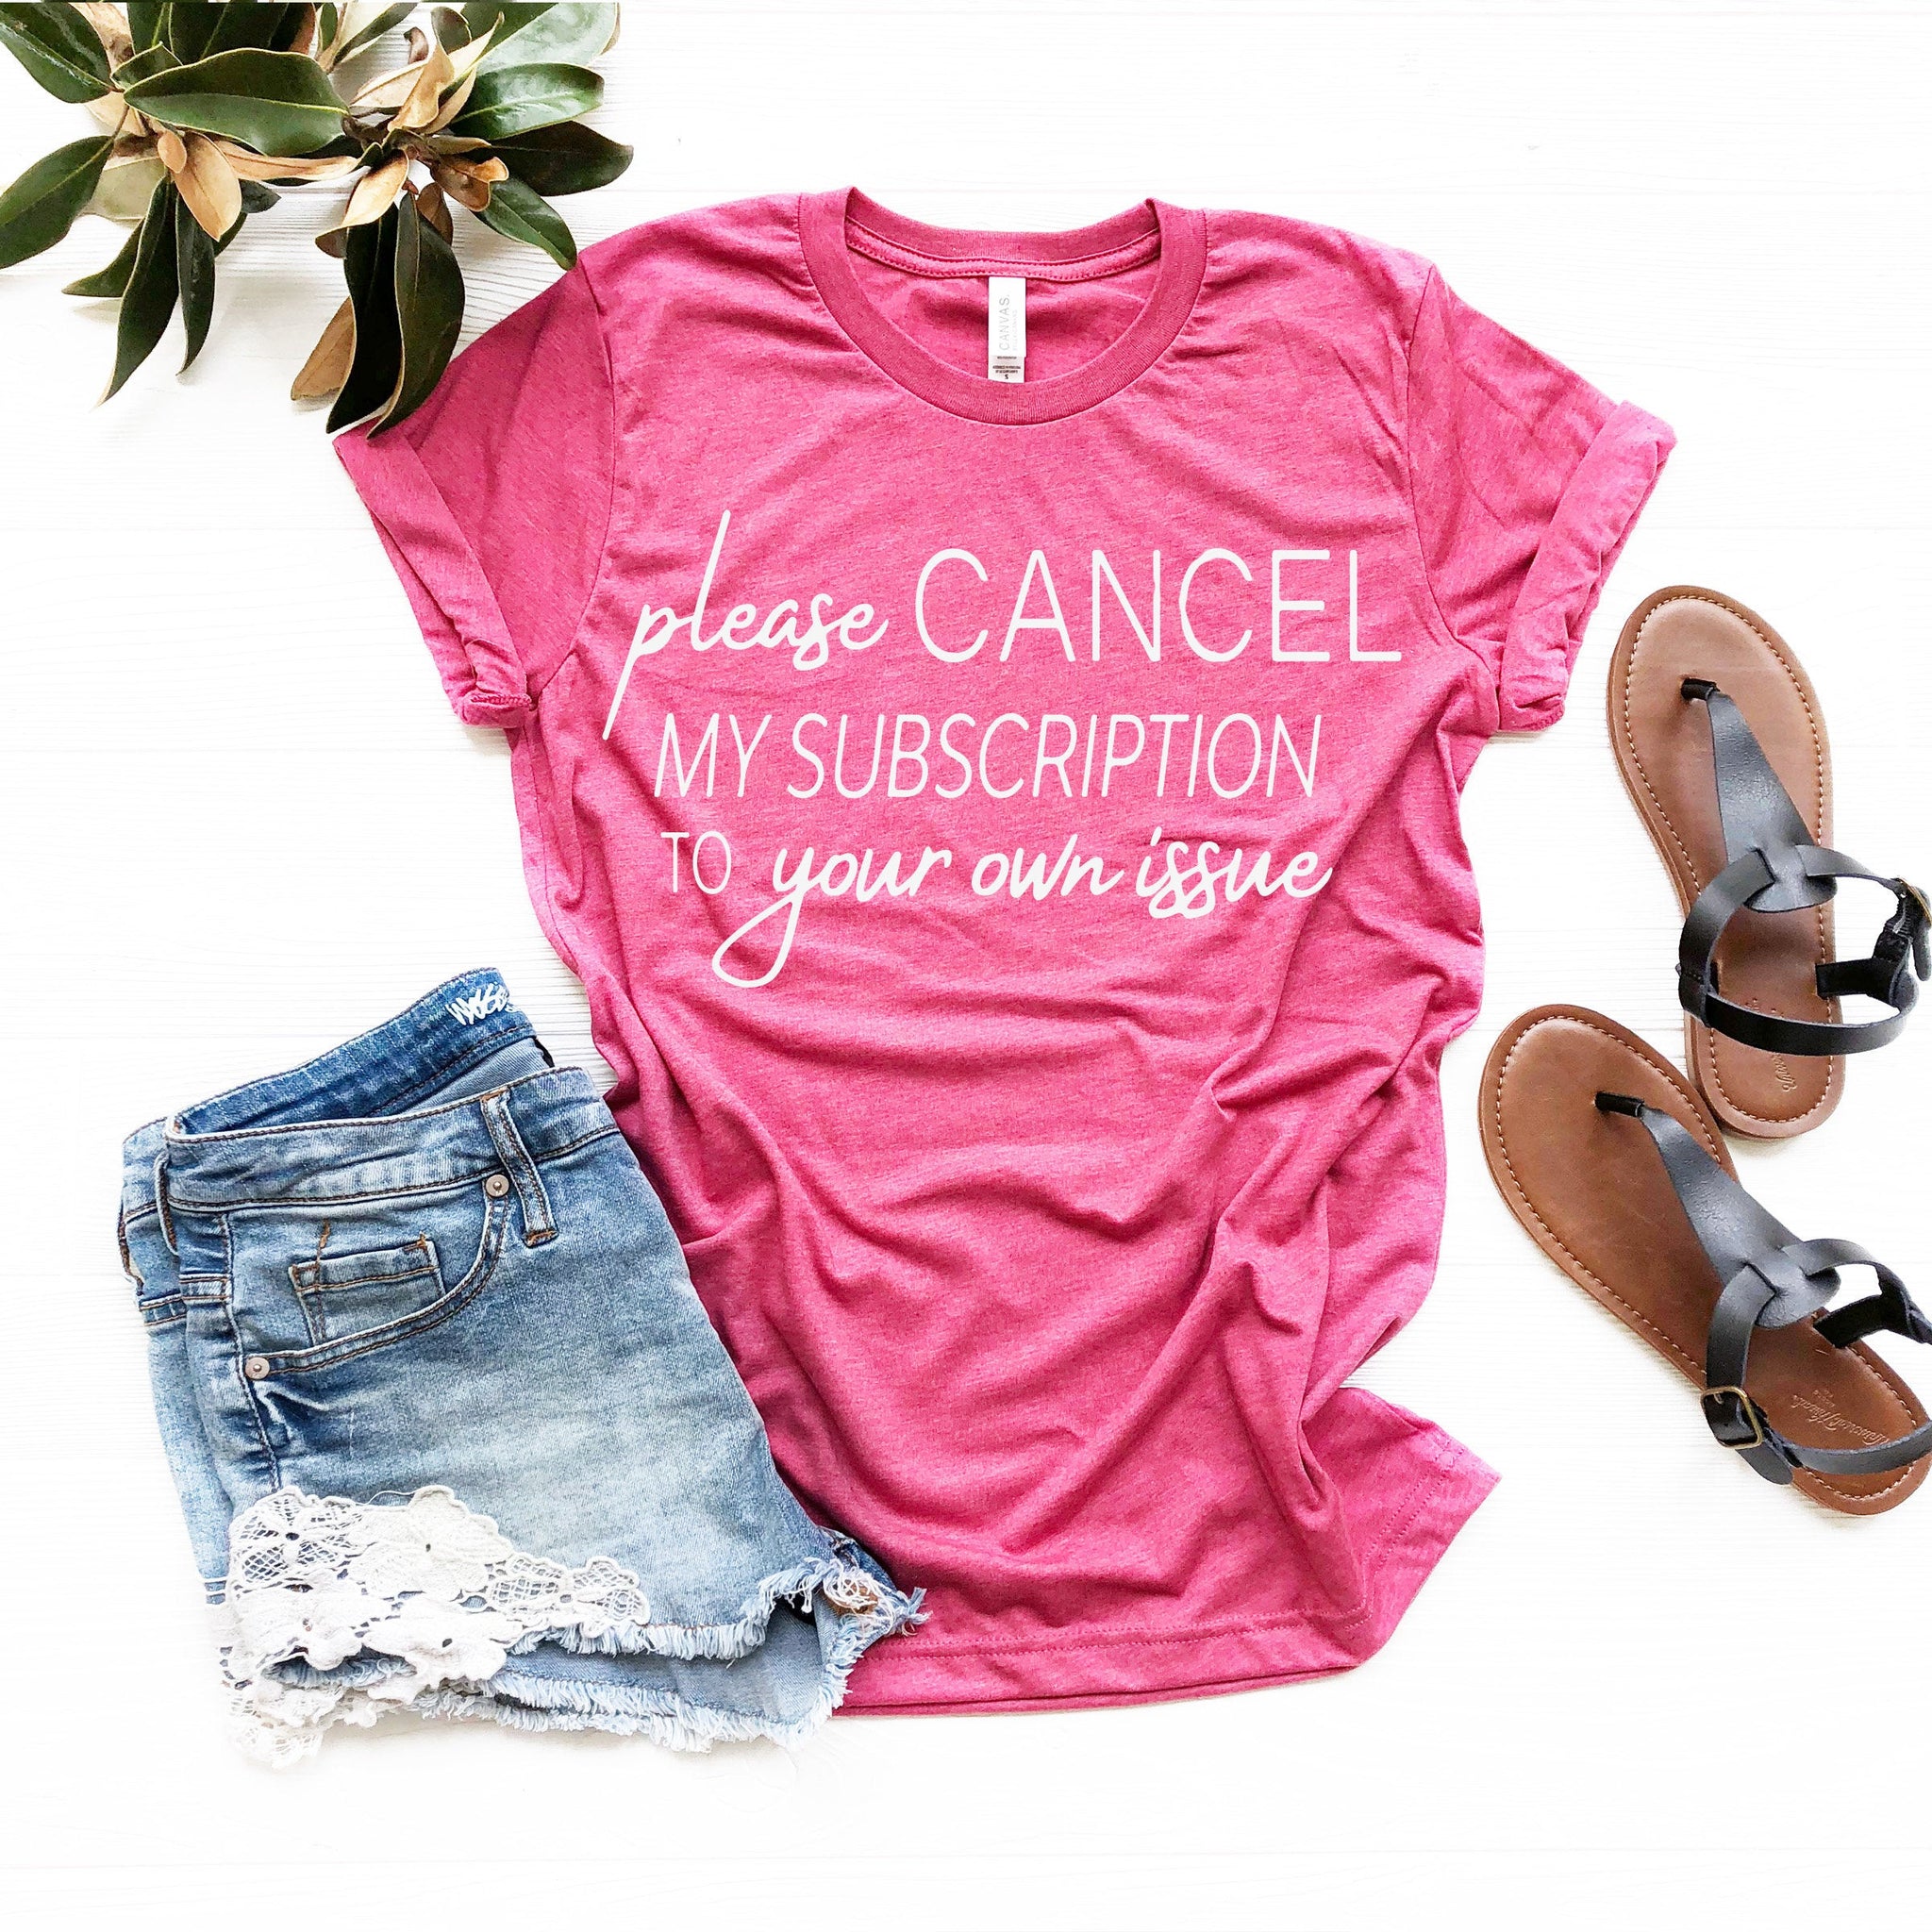 Funny Shirt, Sarcastic Shirt, Funny Slogan Shirts, Cancel My Subscription to Your Issues, Funny Tshirt Sayings, Funny Tshirts For Women,l69 - Fastdeliverytees.com